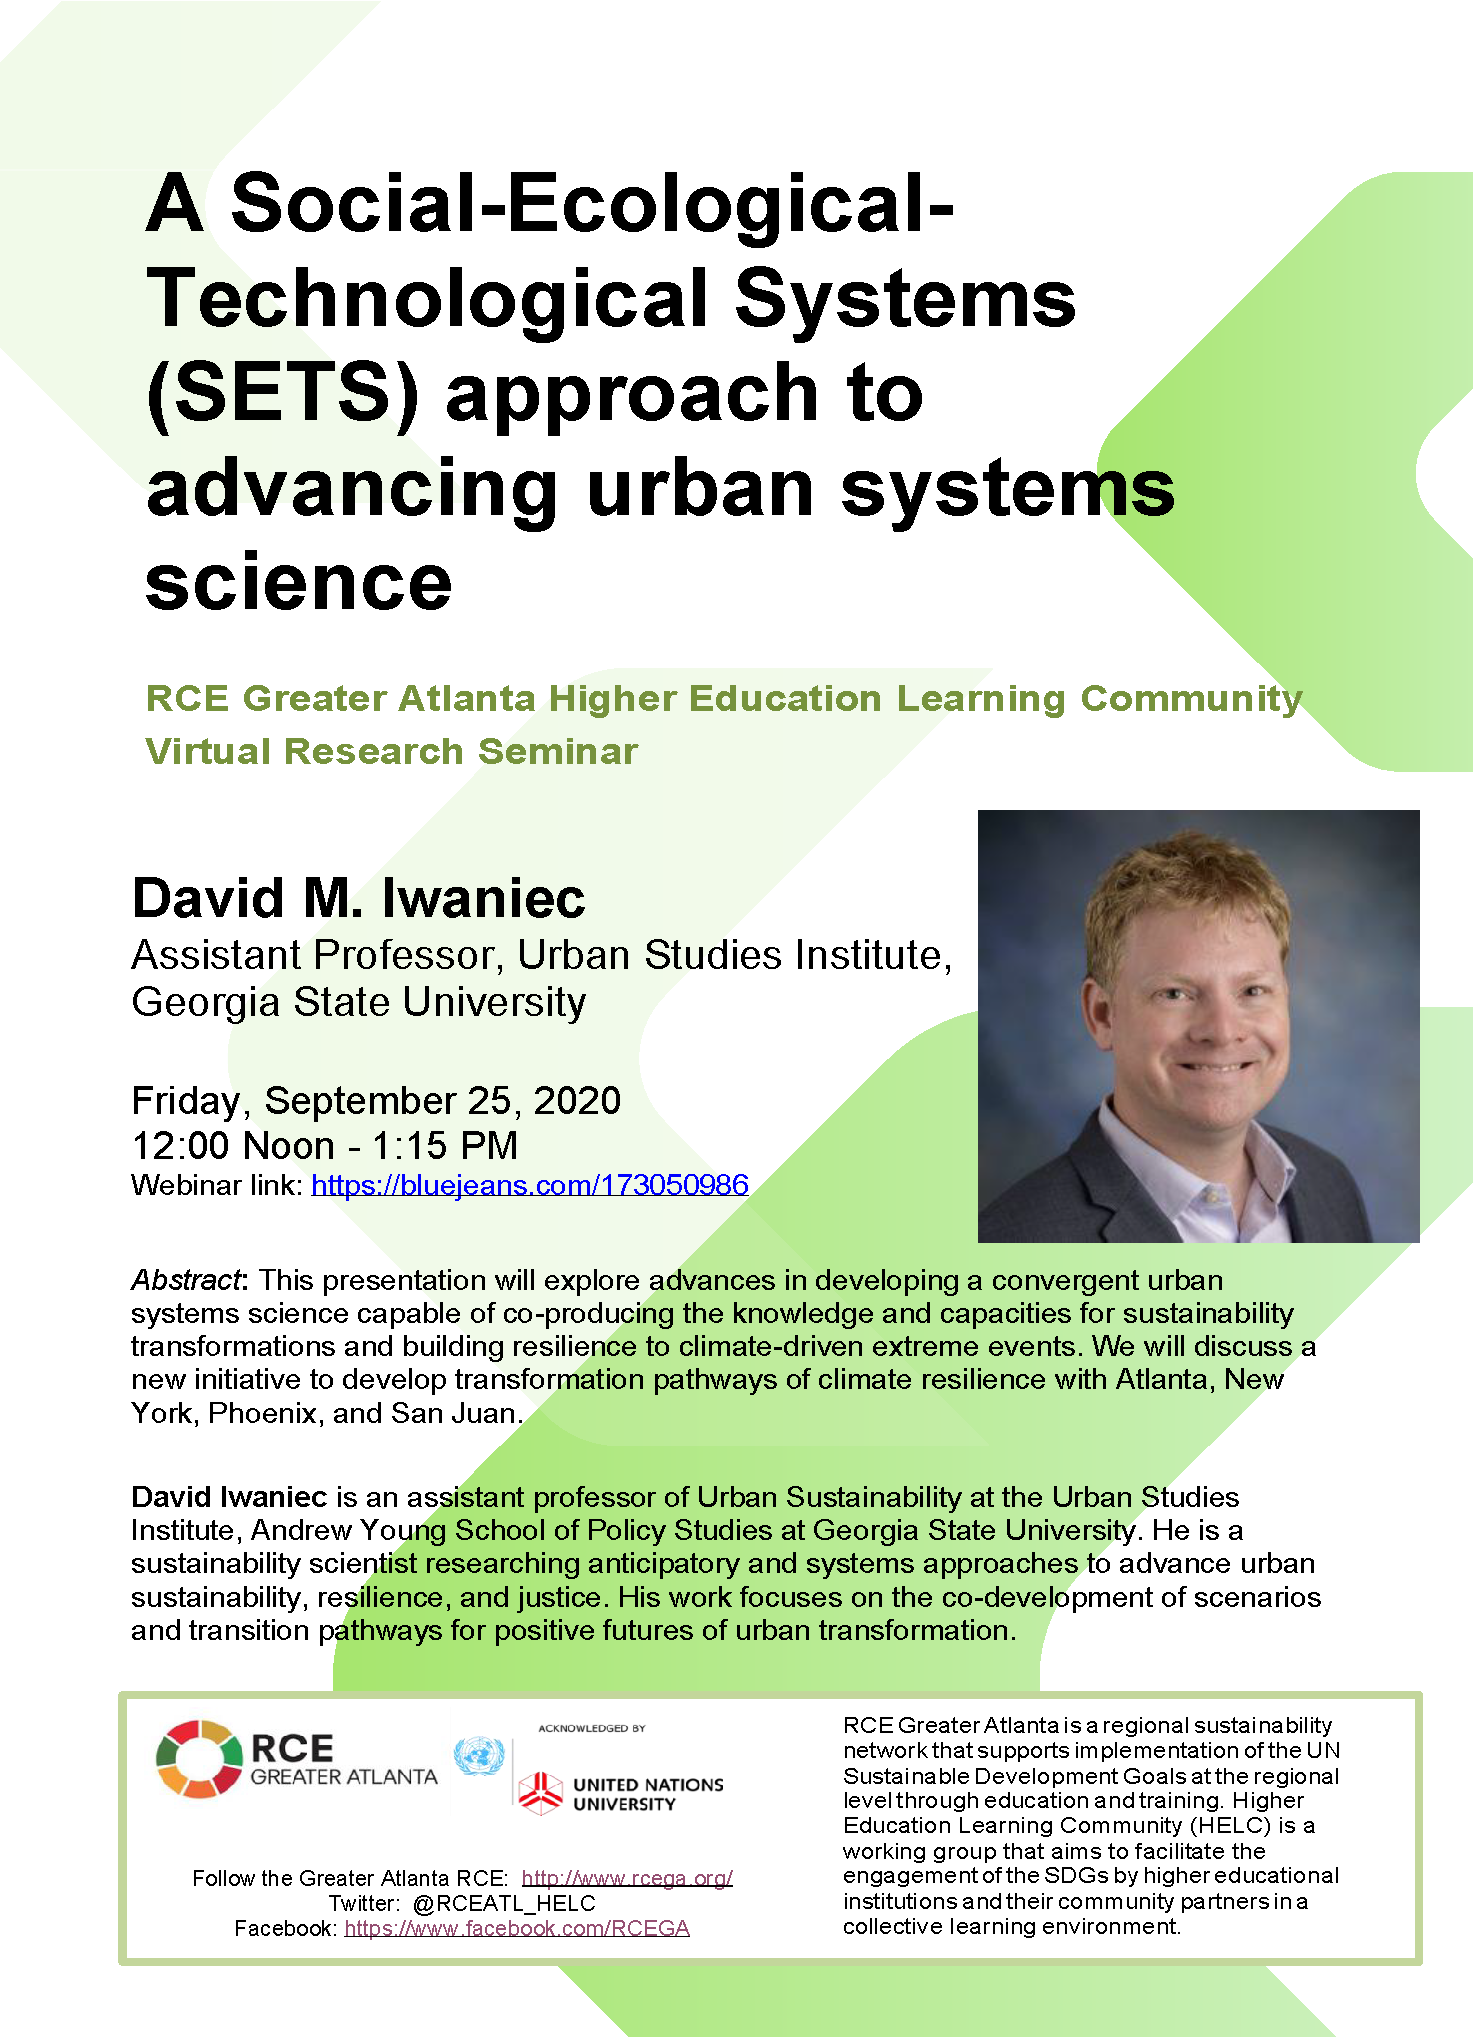 A Social-Ecological-Technological Systems (SETS) approach to advancing urban systems science